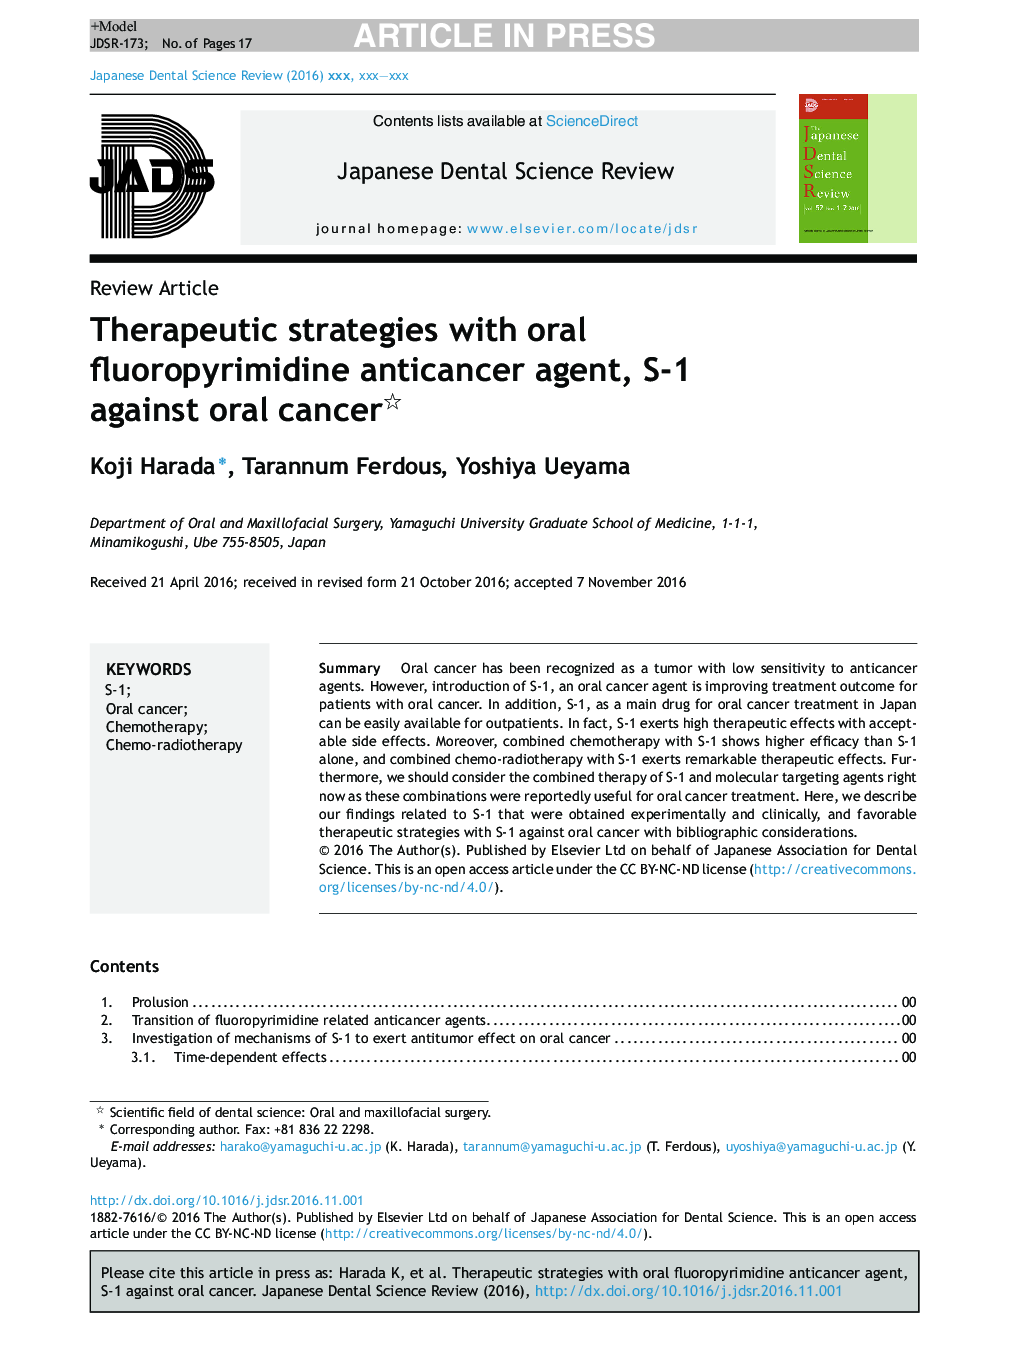 Therapeutic strategies with oral fluoropyrimidine anticancer agent, S-1 against oral cancer